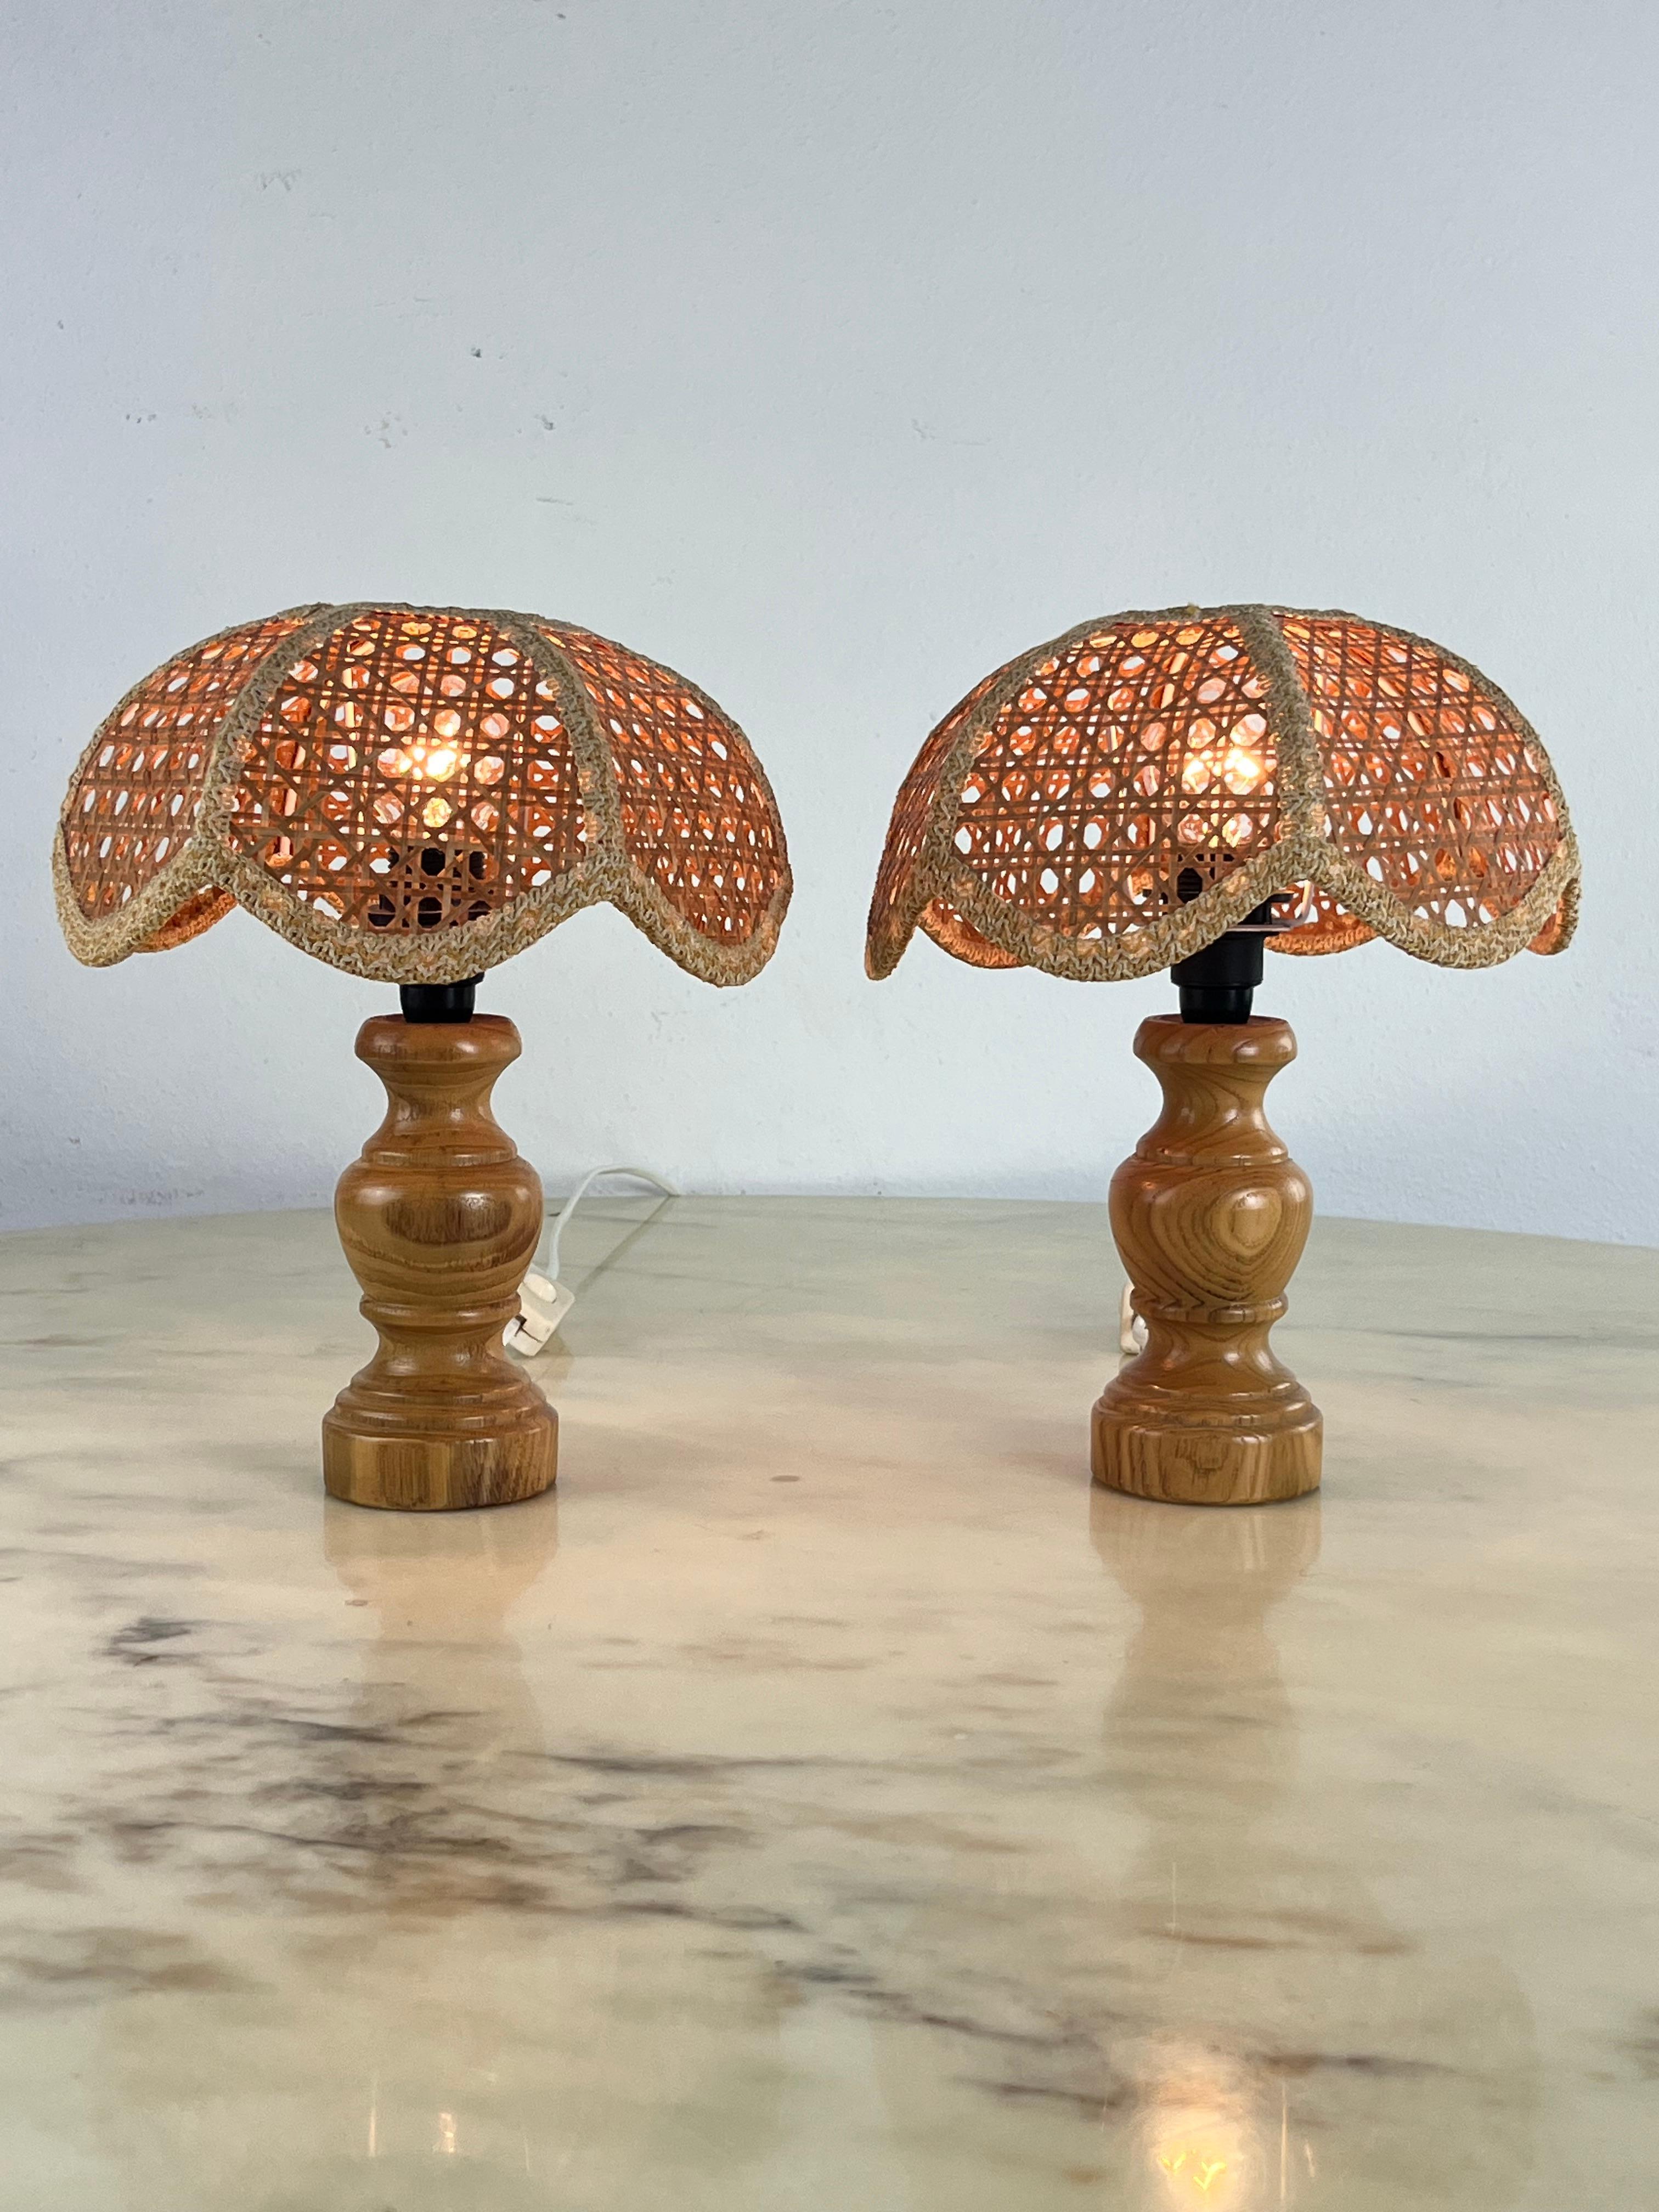 Wonderful pair of mid century wicker and rattan table lamps. These lovely French Riviera style table lamps were designed and made in Italy in the 1960s. Completely handcrafted with perfect proportions, mixing curved rattan, hand-woven Vienna straw